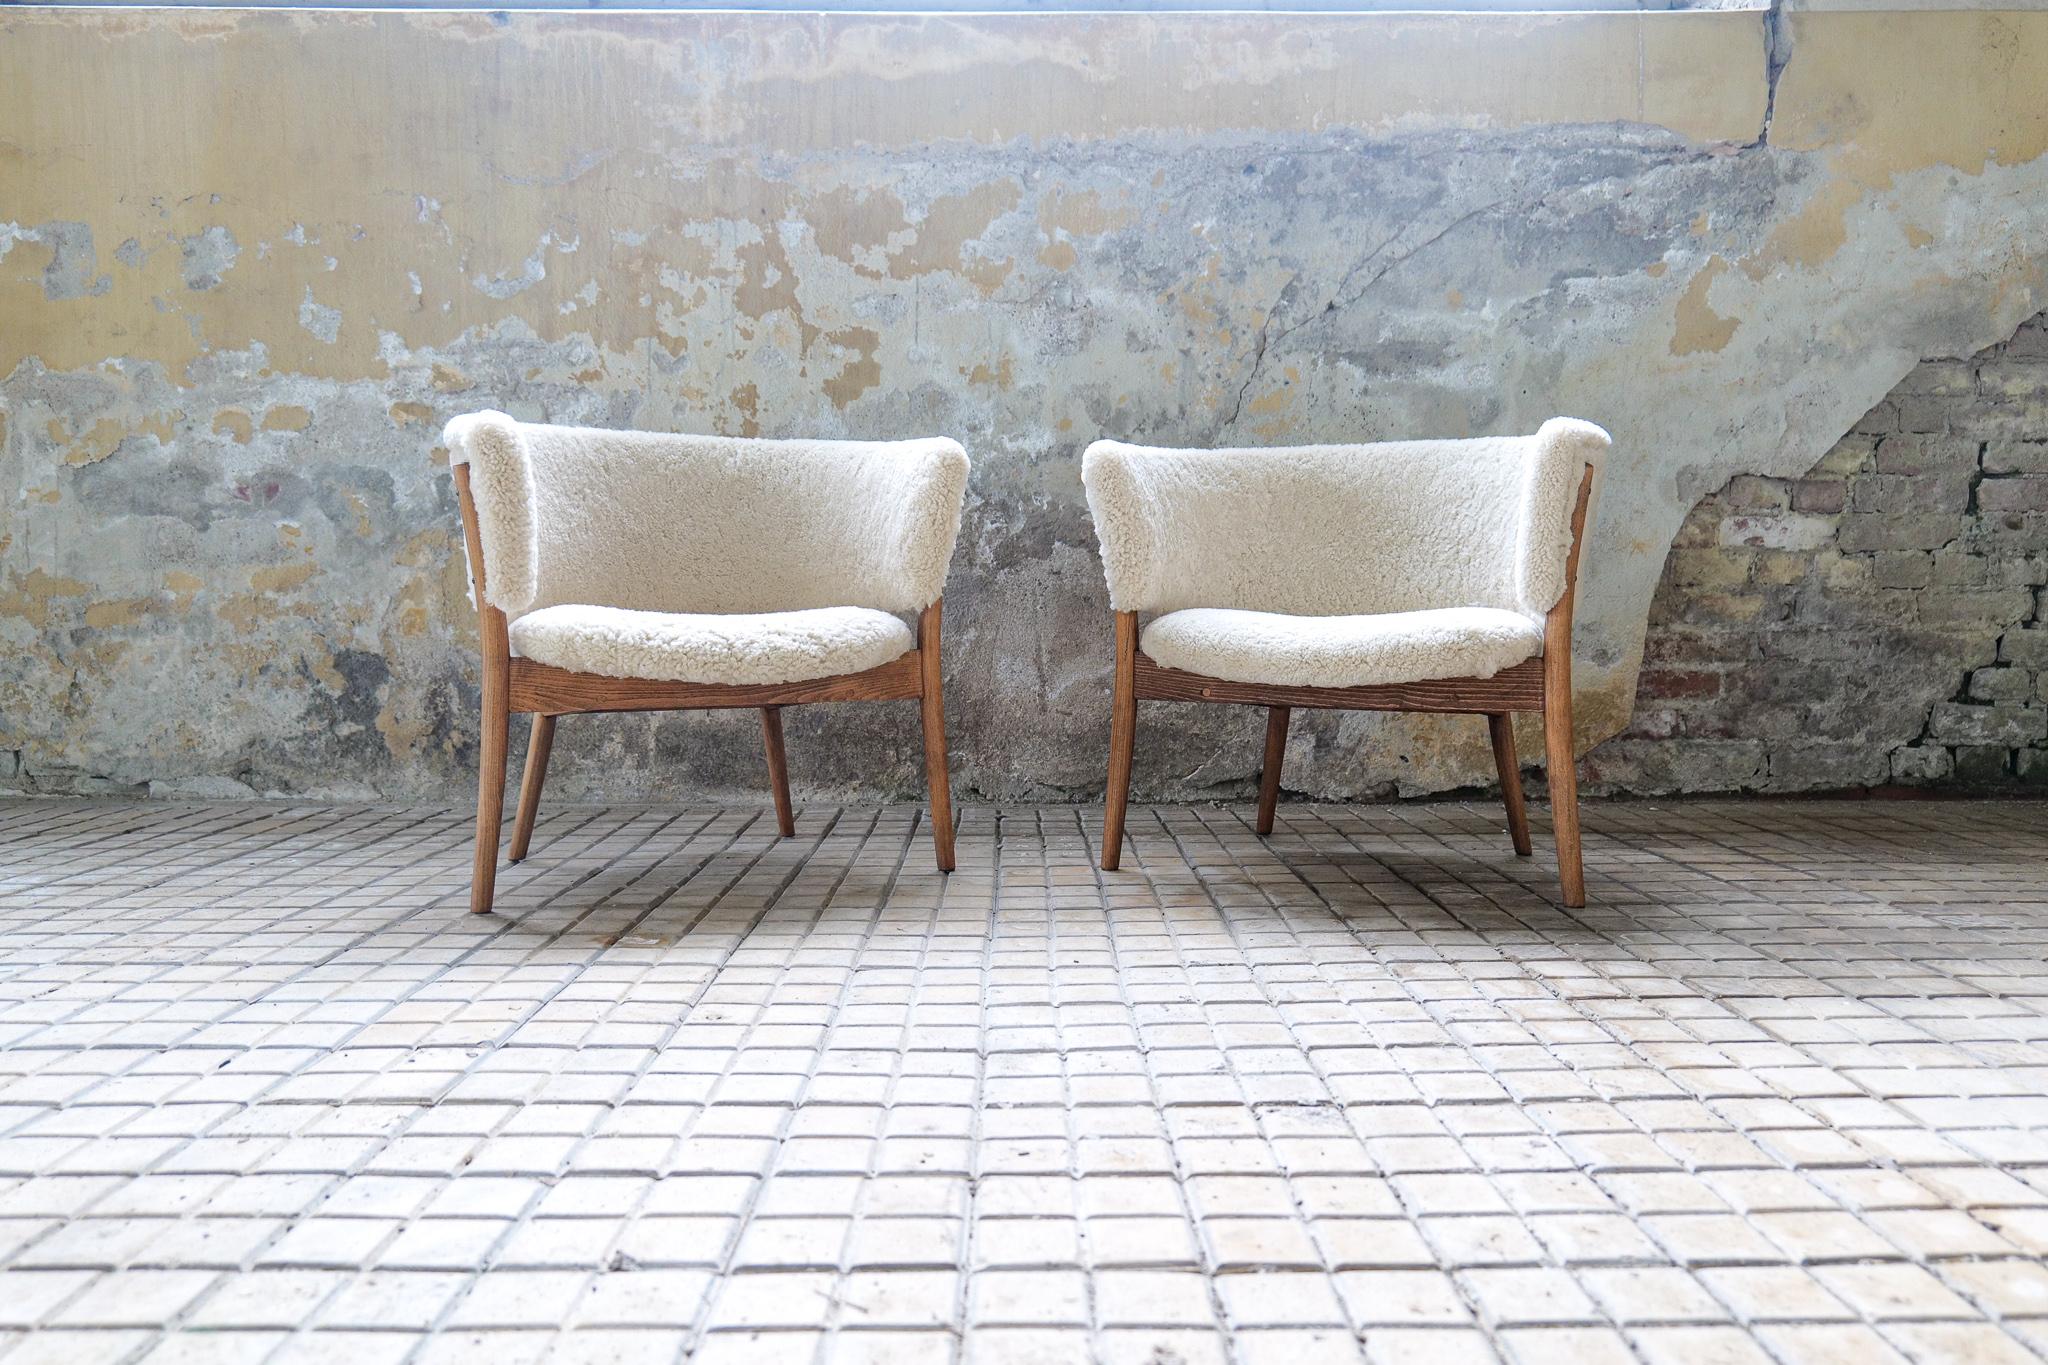 These two wonderfully crafted chairs were made in Sweden 1962 and design by Erik Wörts. The chairs made in stained birch and sheepskin has been redone both in the wooden part as well all new upholstery with quality sheepskin. The skin itself is made